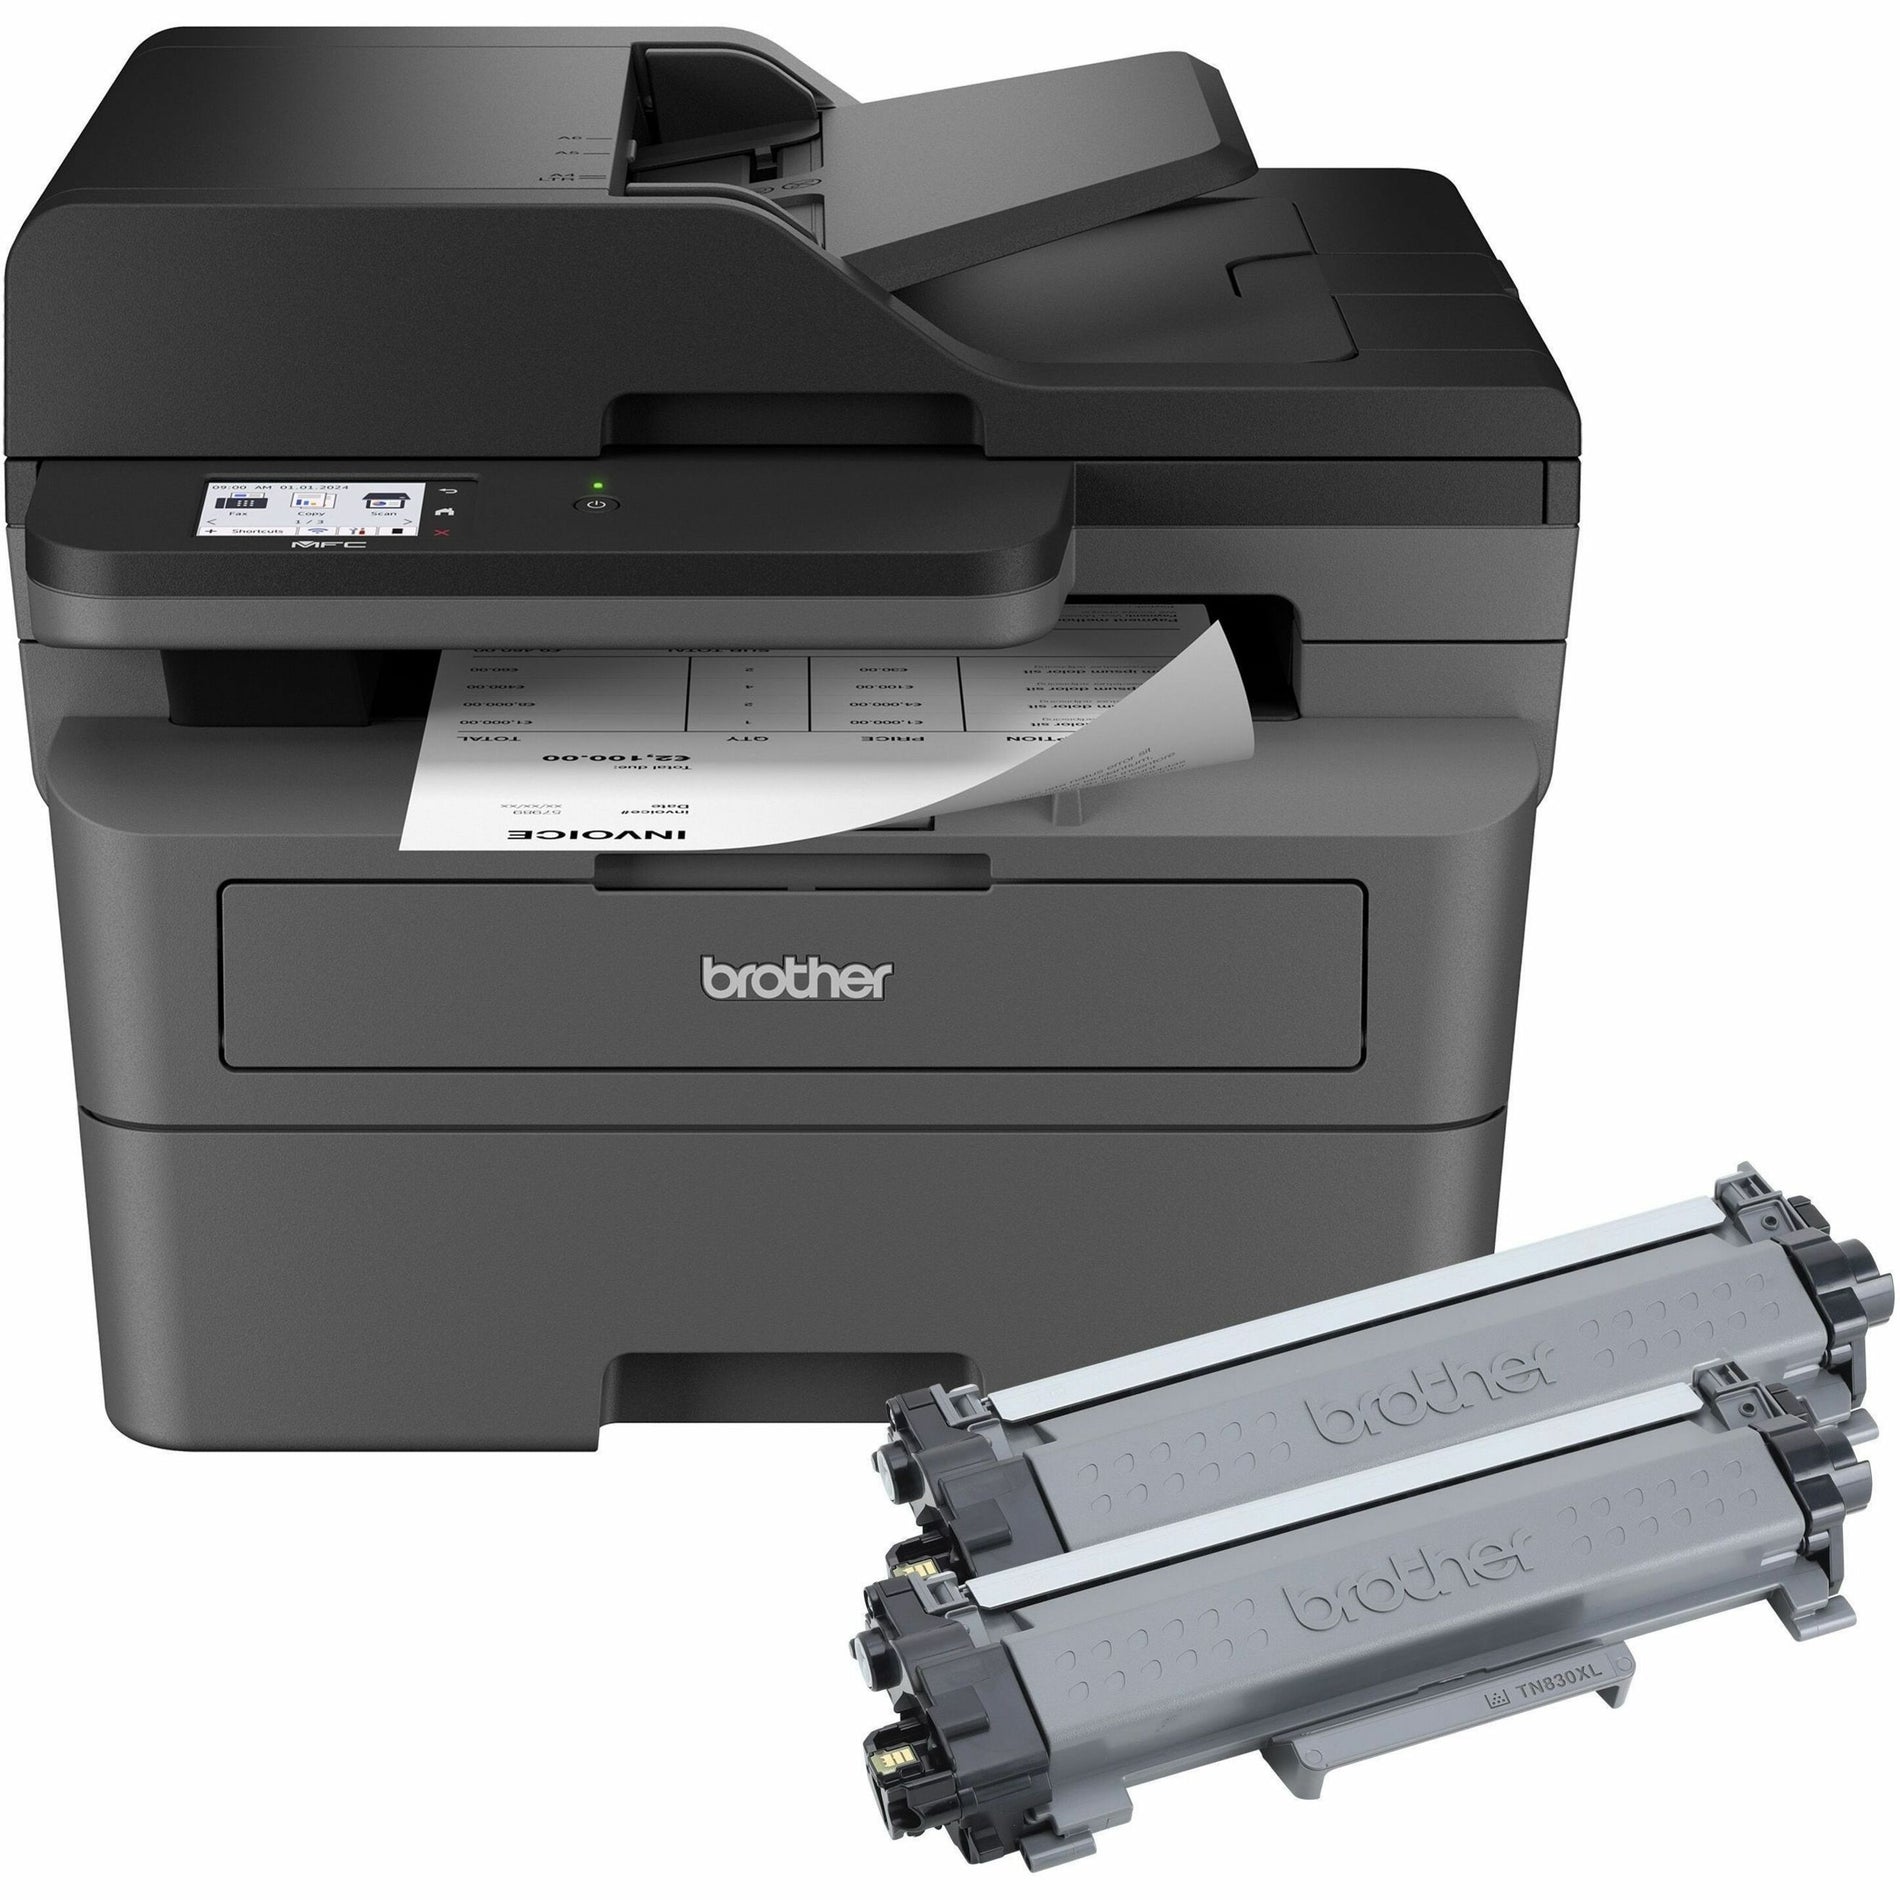 Brother MFCL2820DWXL Wireless MFC-L2820DW XL Compact Monochrome All-in-One Laser Printer, Automatic Duplex Printing